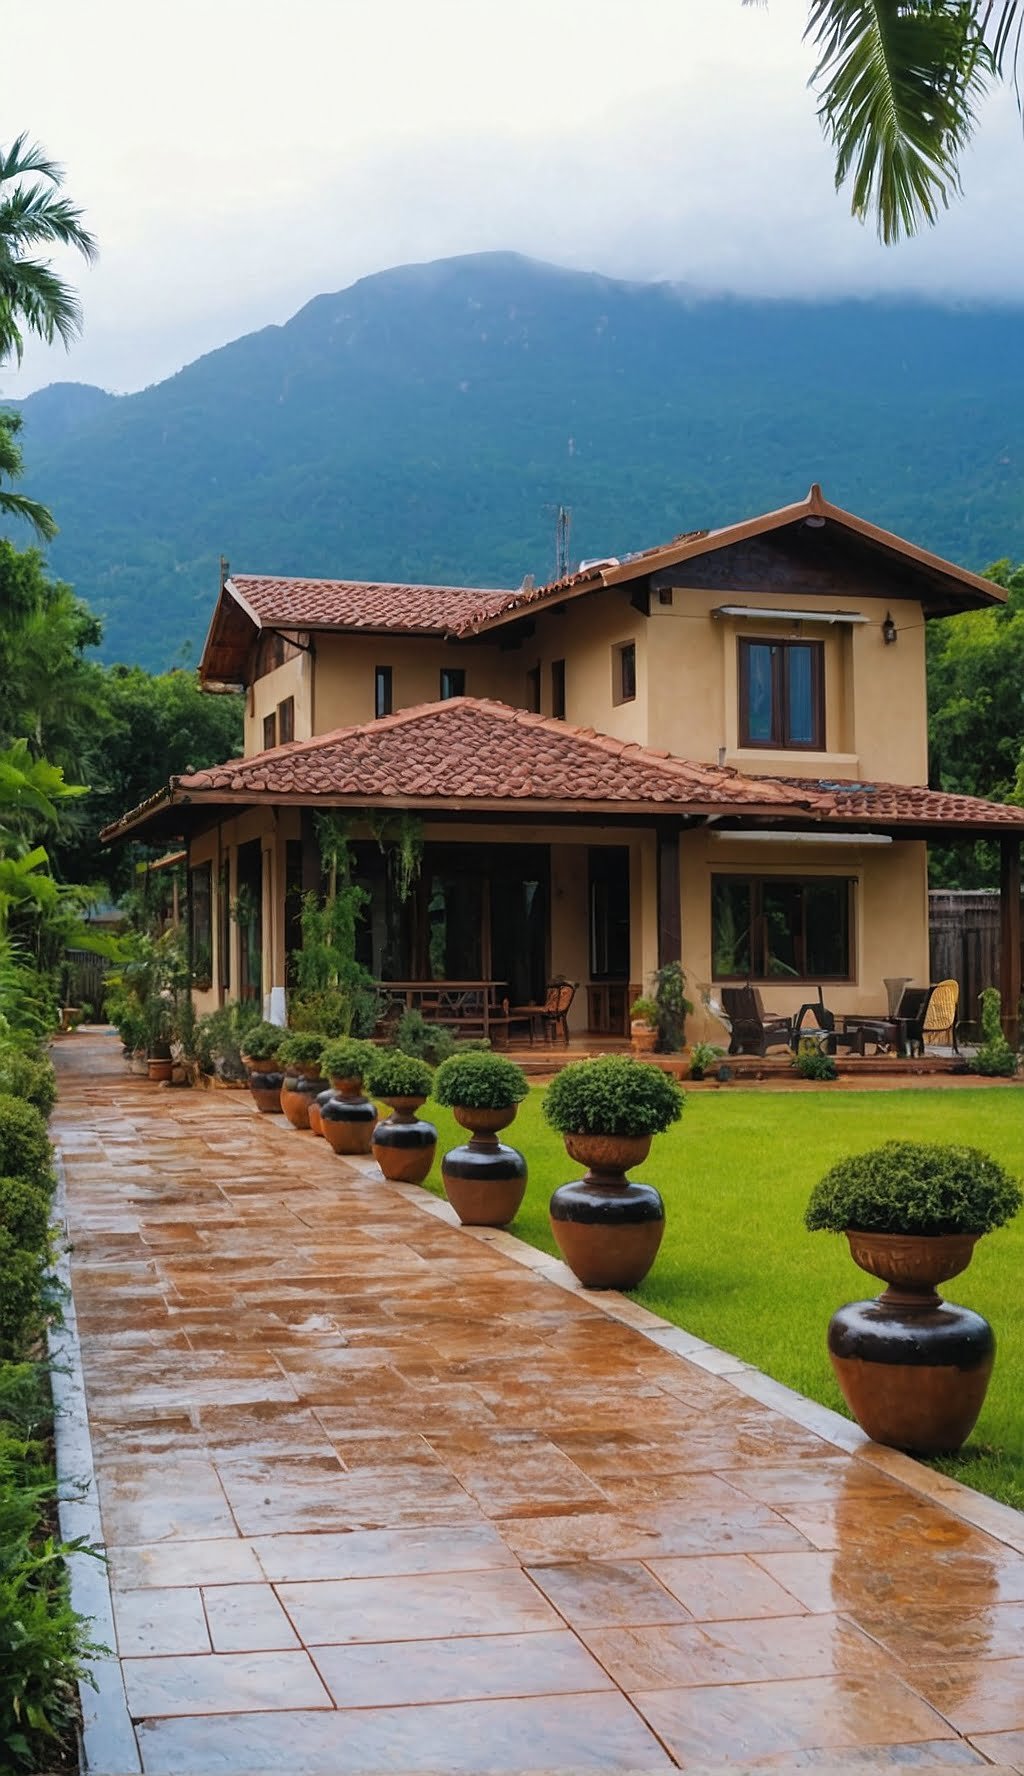 Rustic Charm: Classic Elegance with Mountain Backdrop